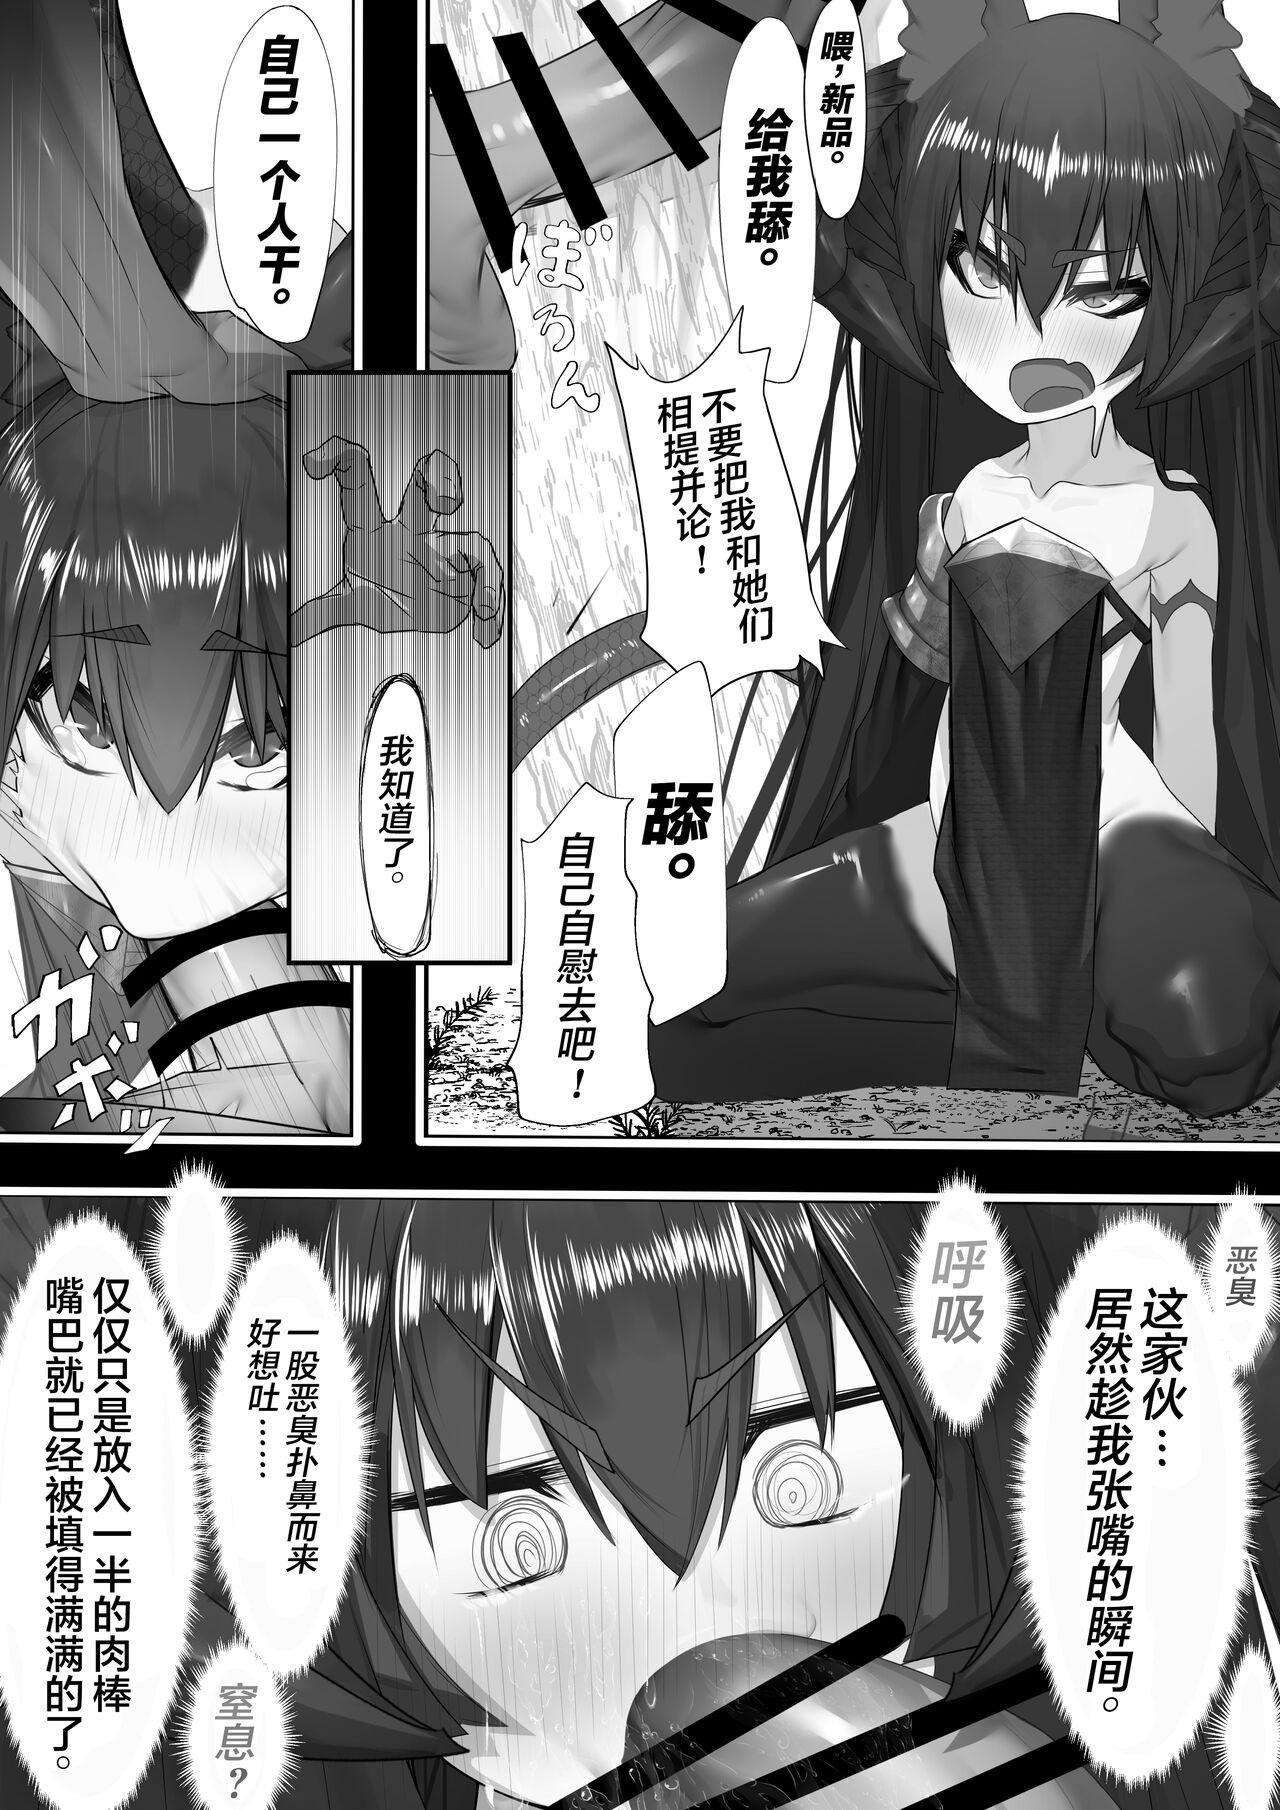 Ejaculation 上位魔族・・なんだが？ Amateurs Gone Wild - Page 11